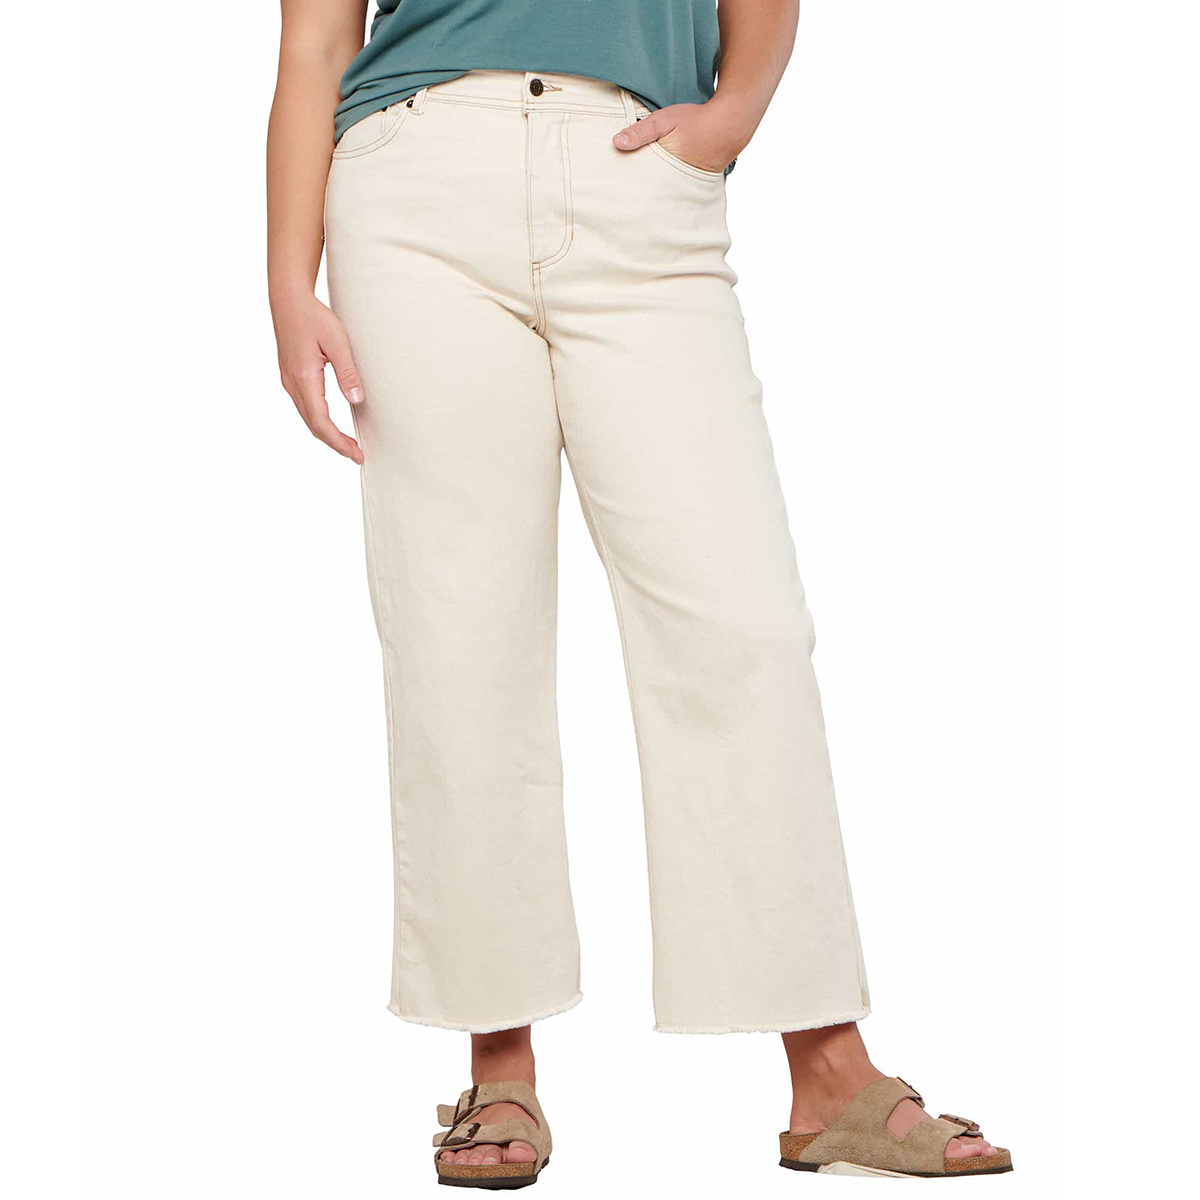 Toad & Co Balsam Seeded Cutoff Pants - Size 10